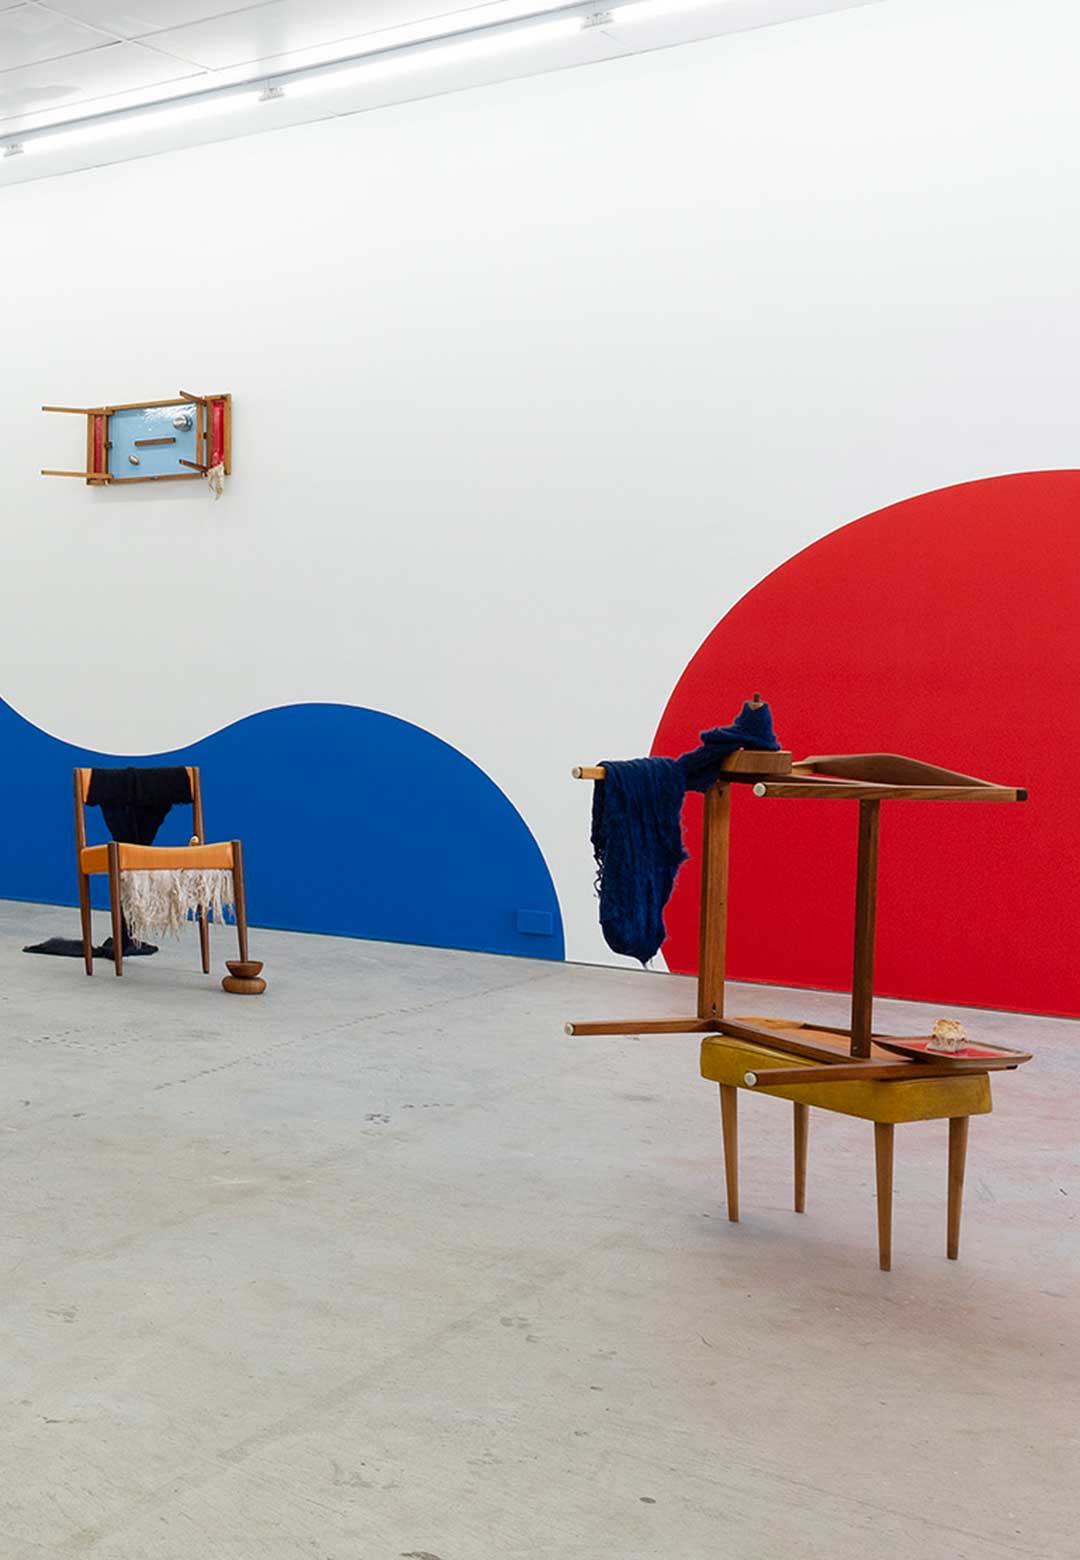 ‘The Palace at 4pm’ juxtaposes Midcentury furniture with unpredictability and disorder